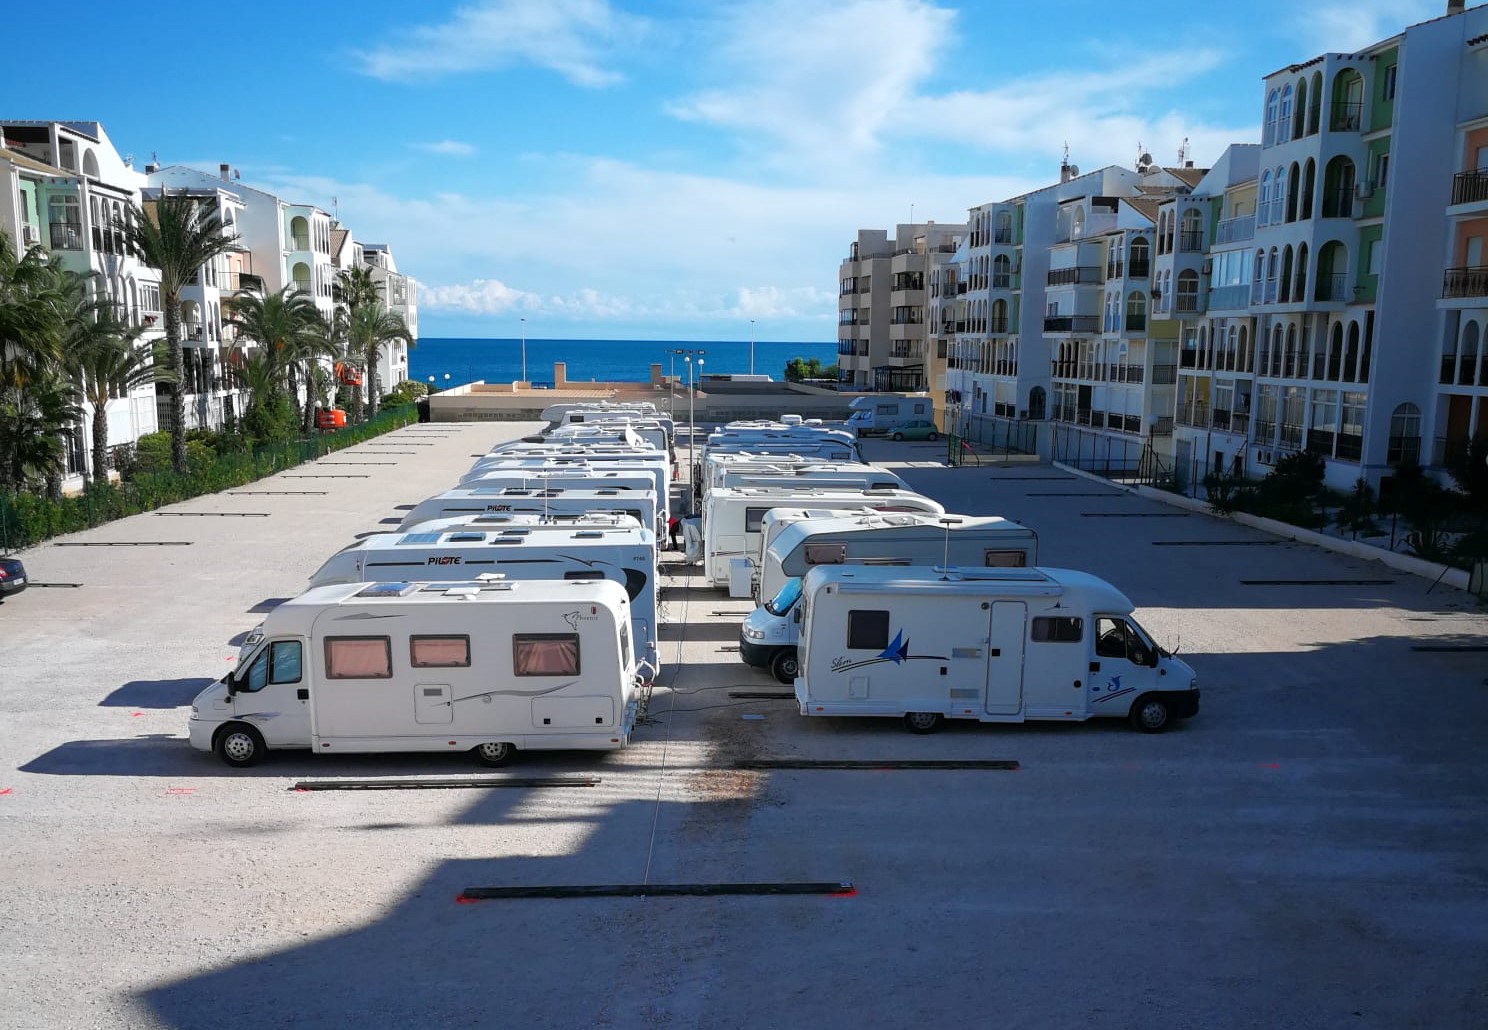 Private Car Park Set For Closure After Motorhomes Make Overnight Stays On Spain's Costa Blanca